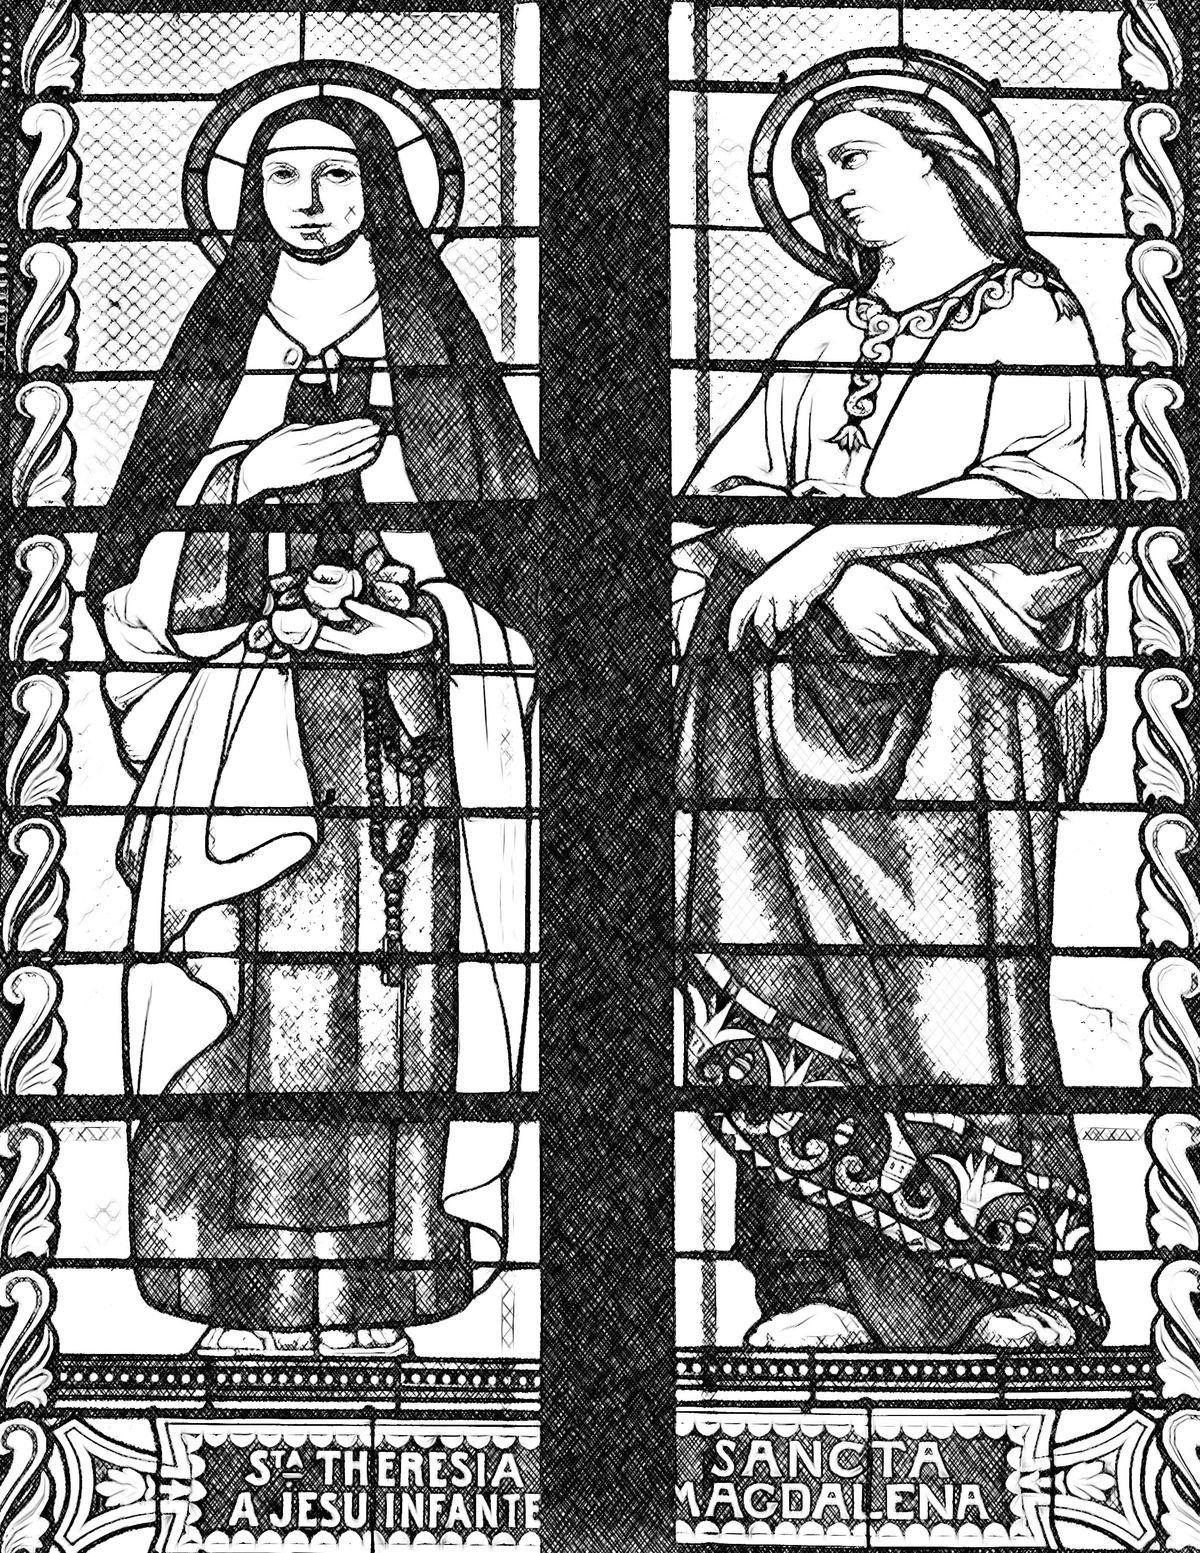 Saint Therese of the Child Jesus and Saint Magdalene